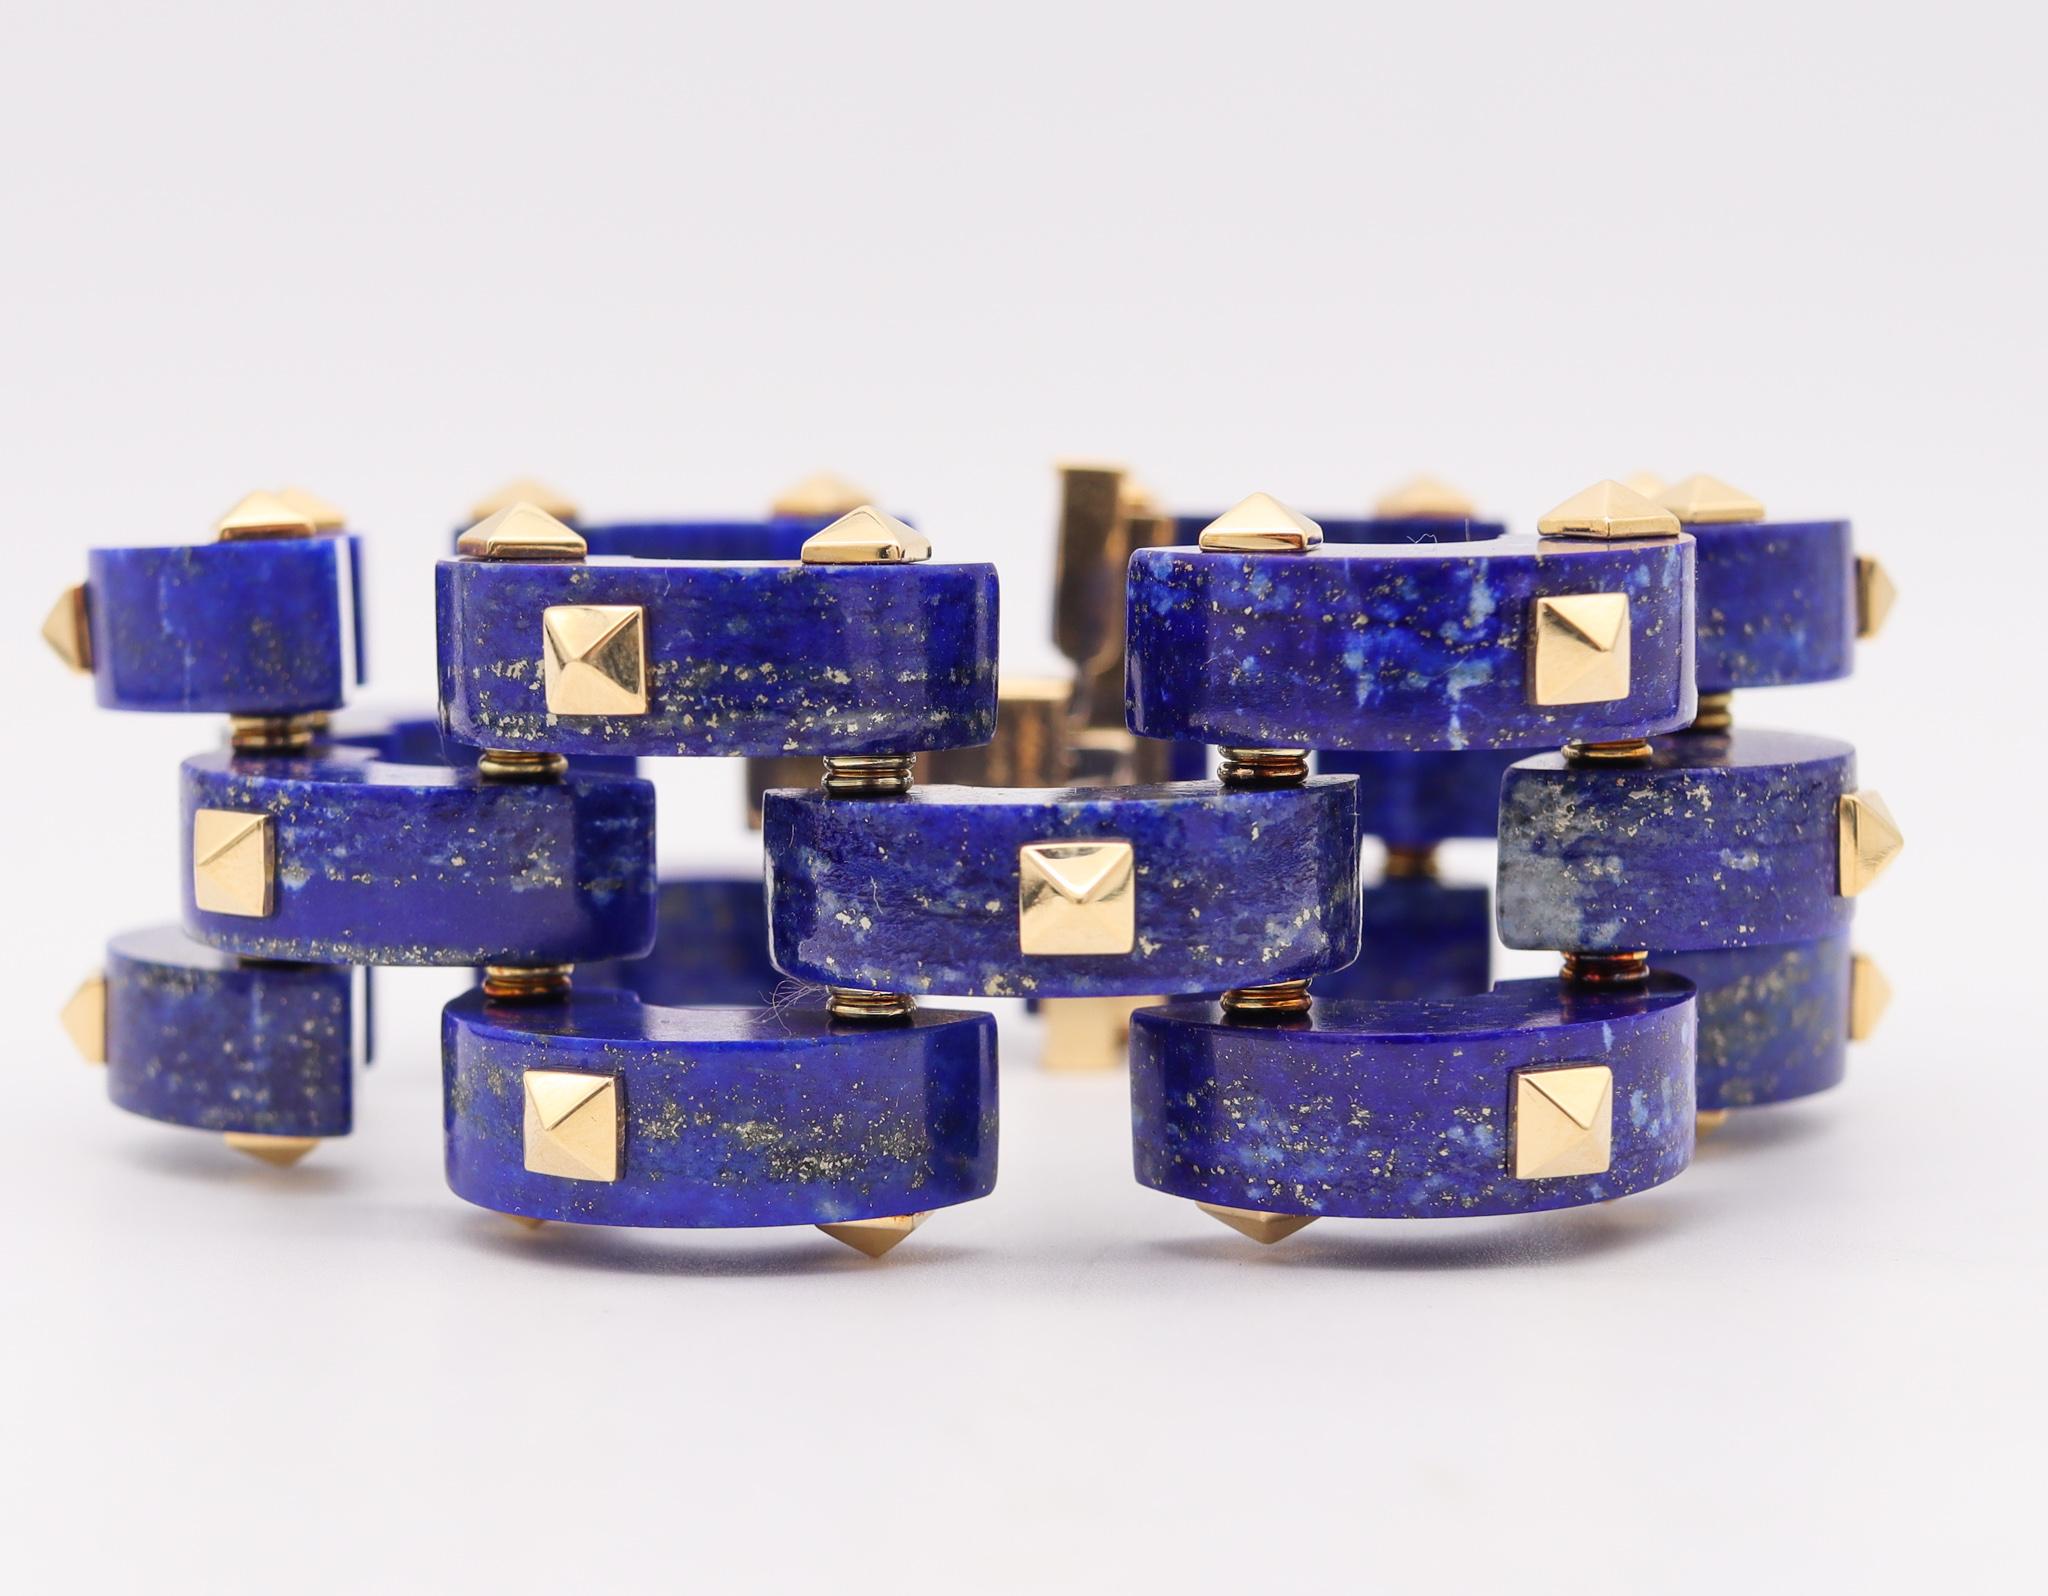 Cabochon Aletto Brothers Sculptural Bracelet in 18kt Yellow Gold with Carved Lapis Lazuli For Sale